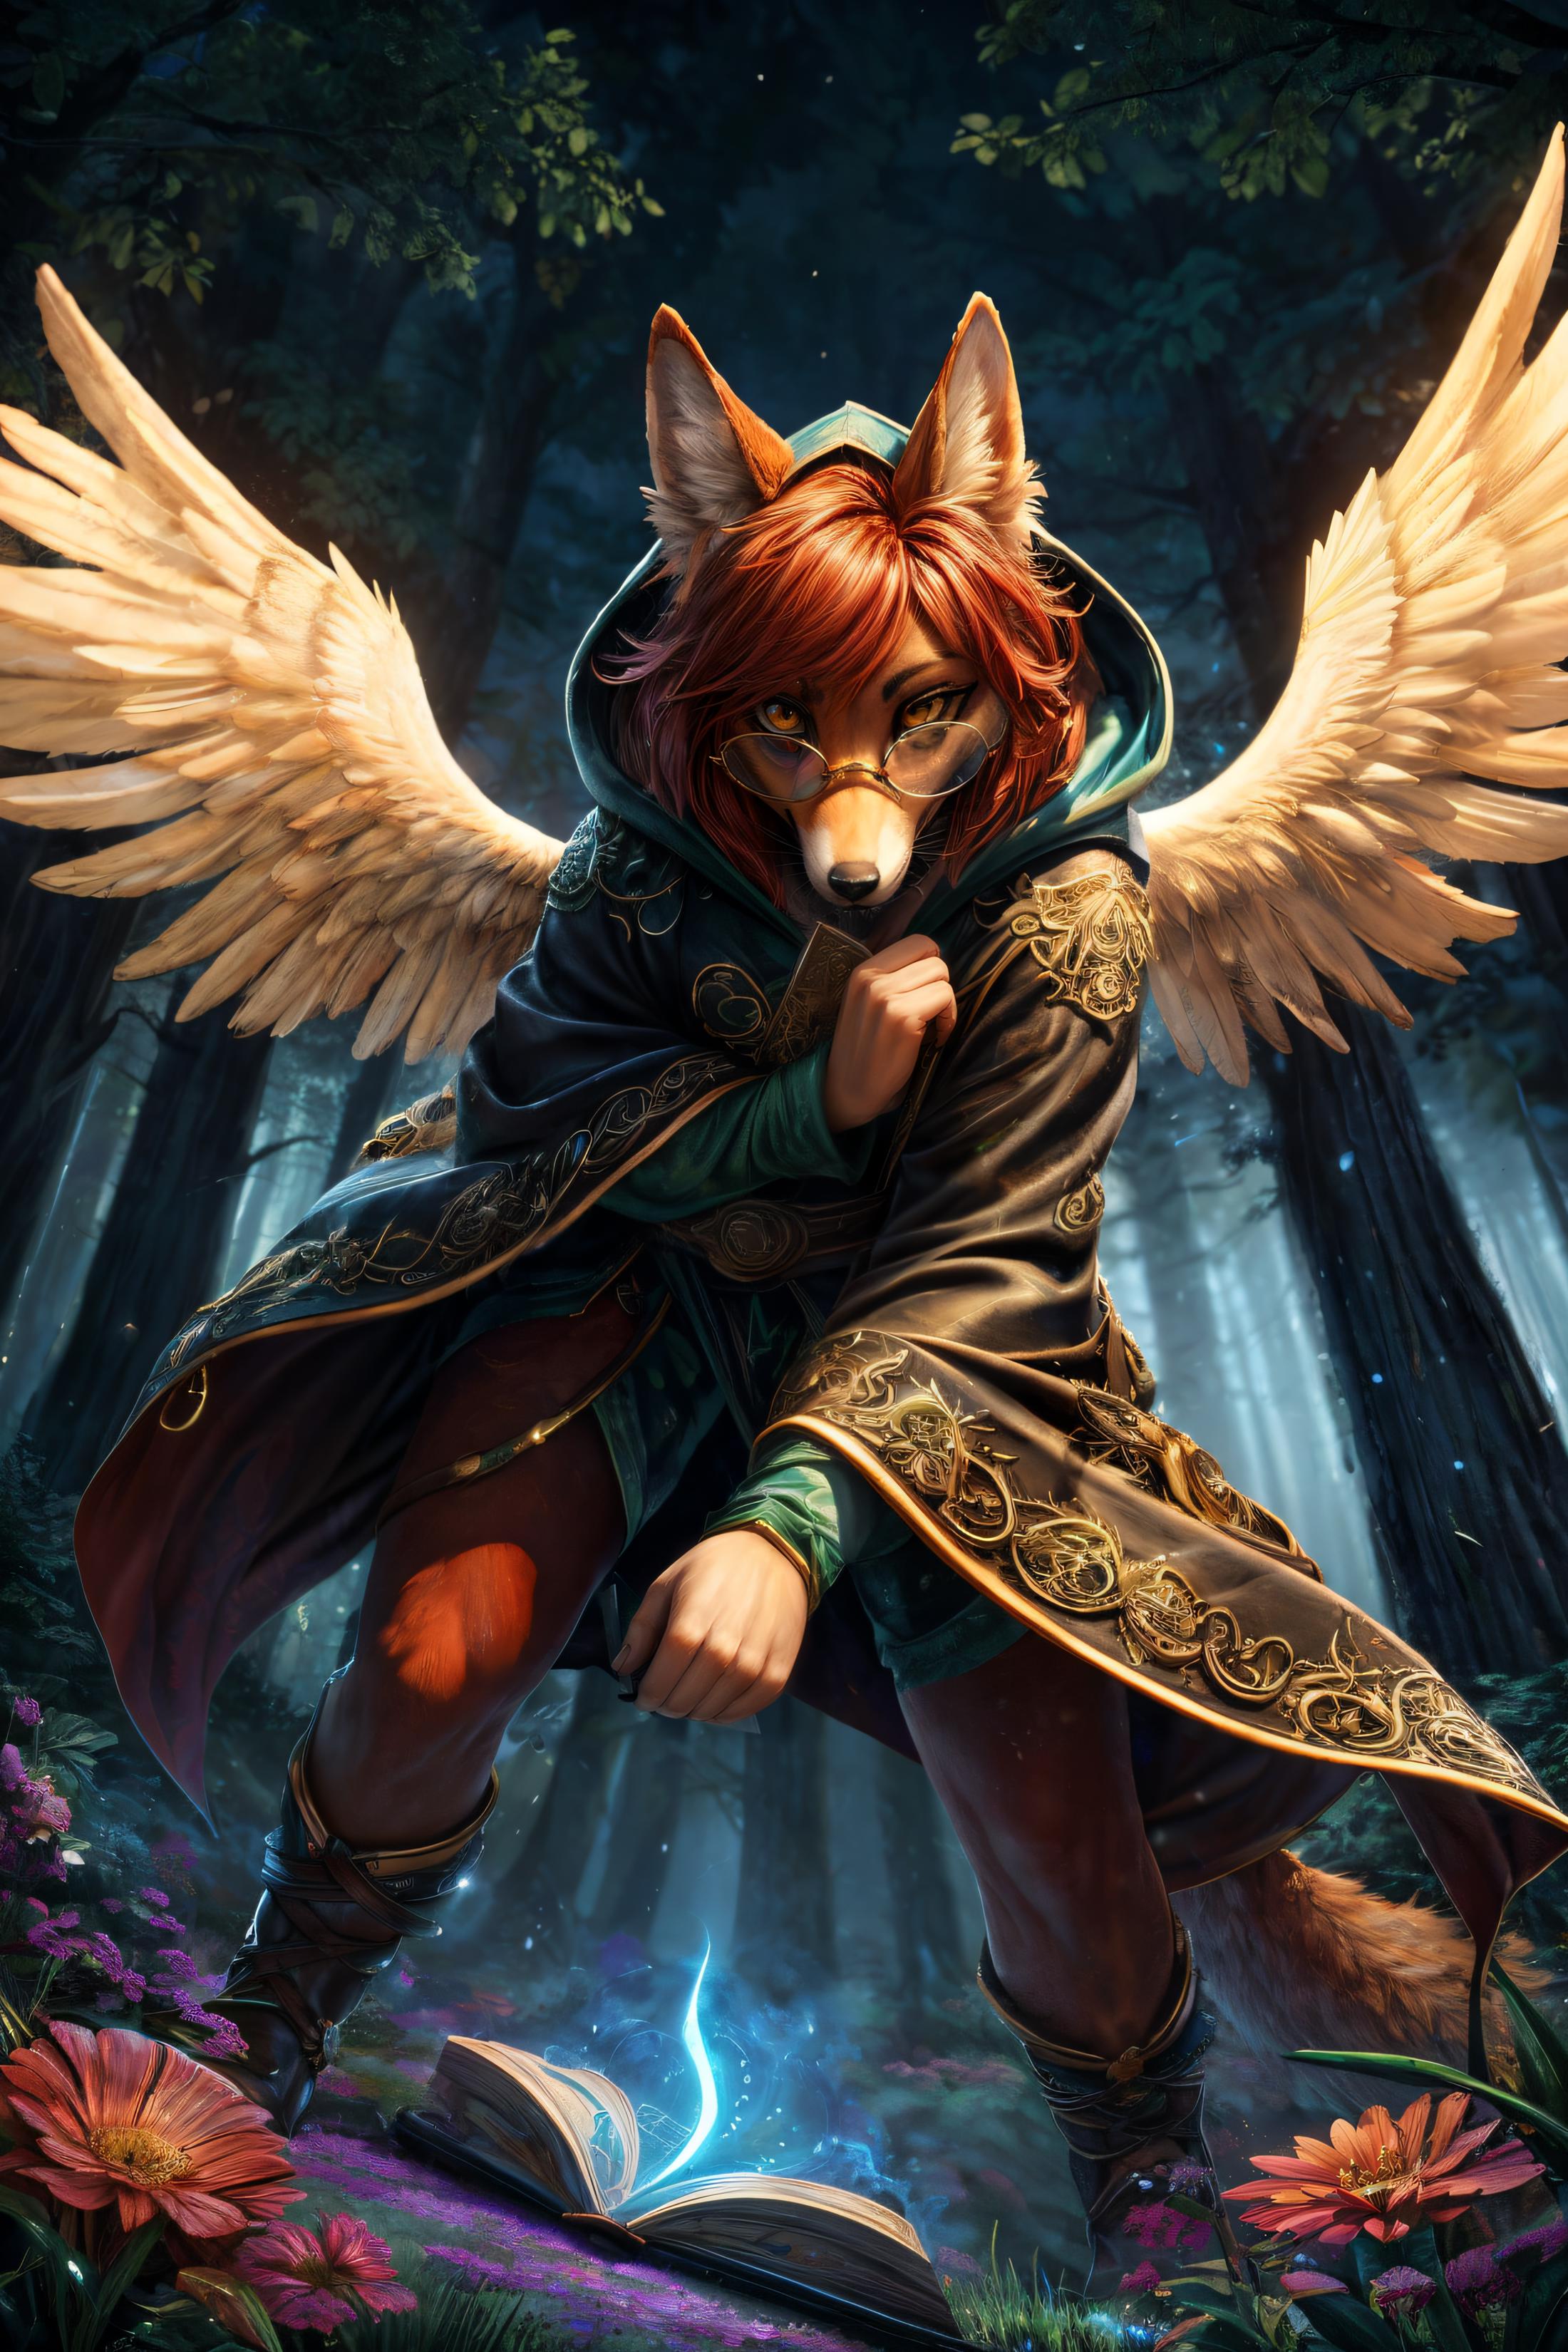 A red fox with wings and a hooded cape.